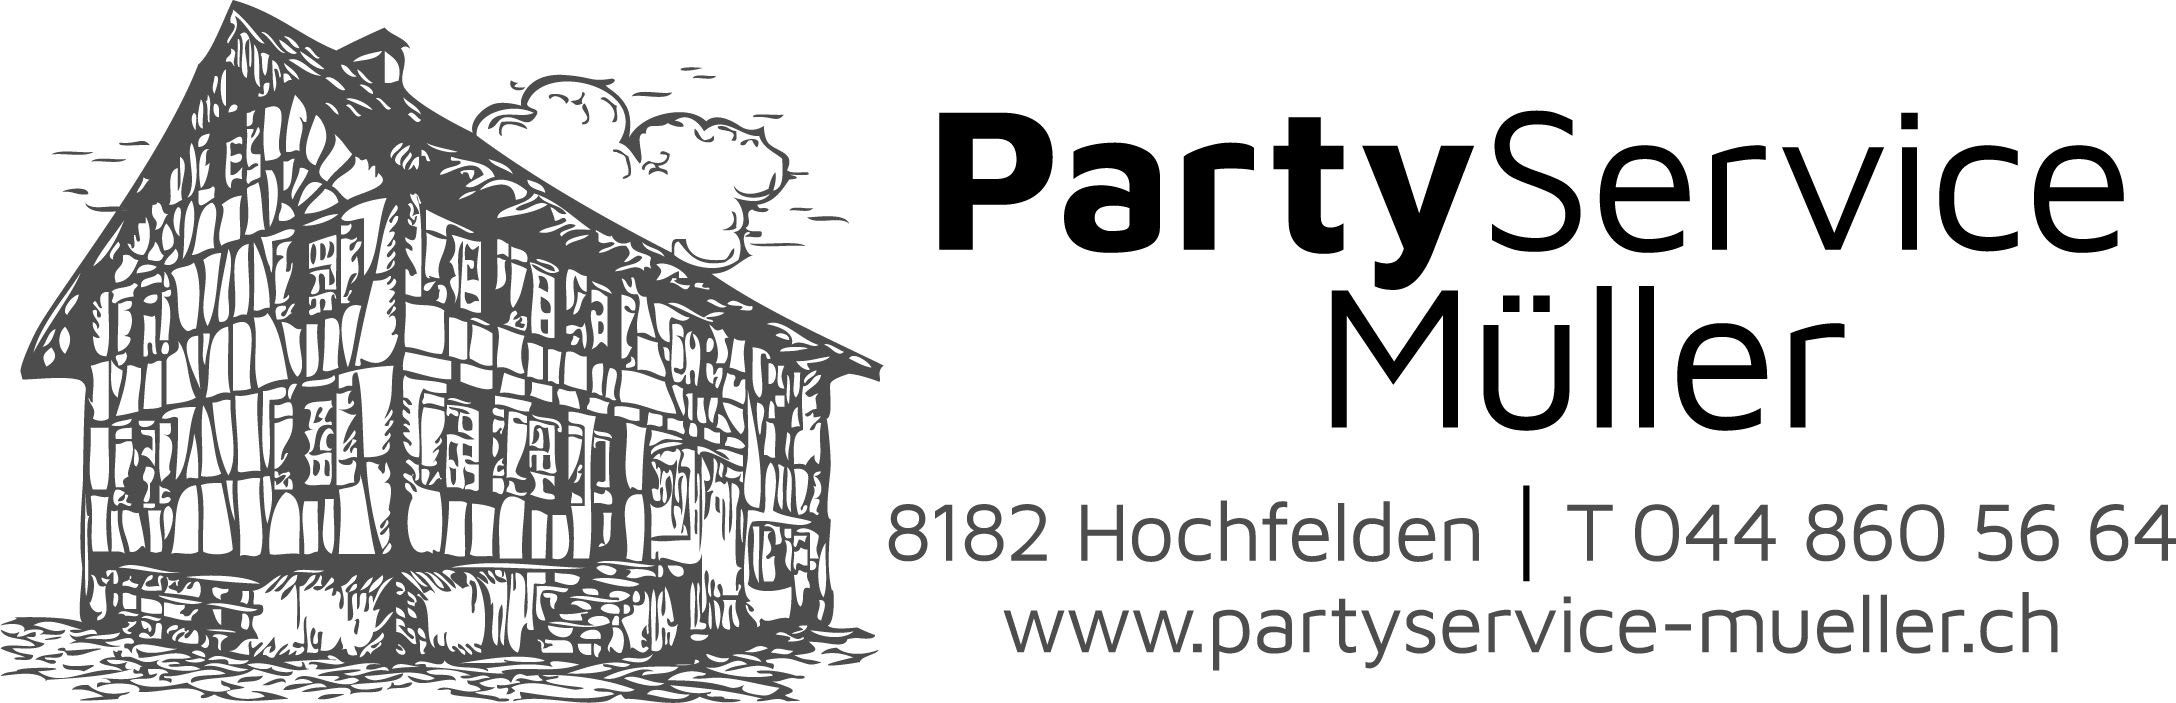 Partyservice Müller GmbH